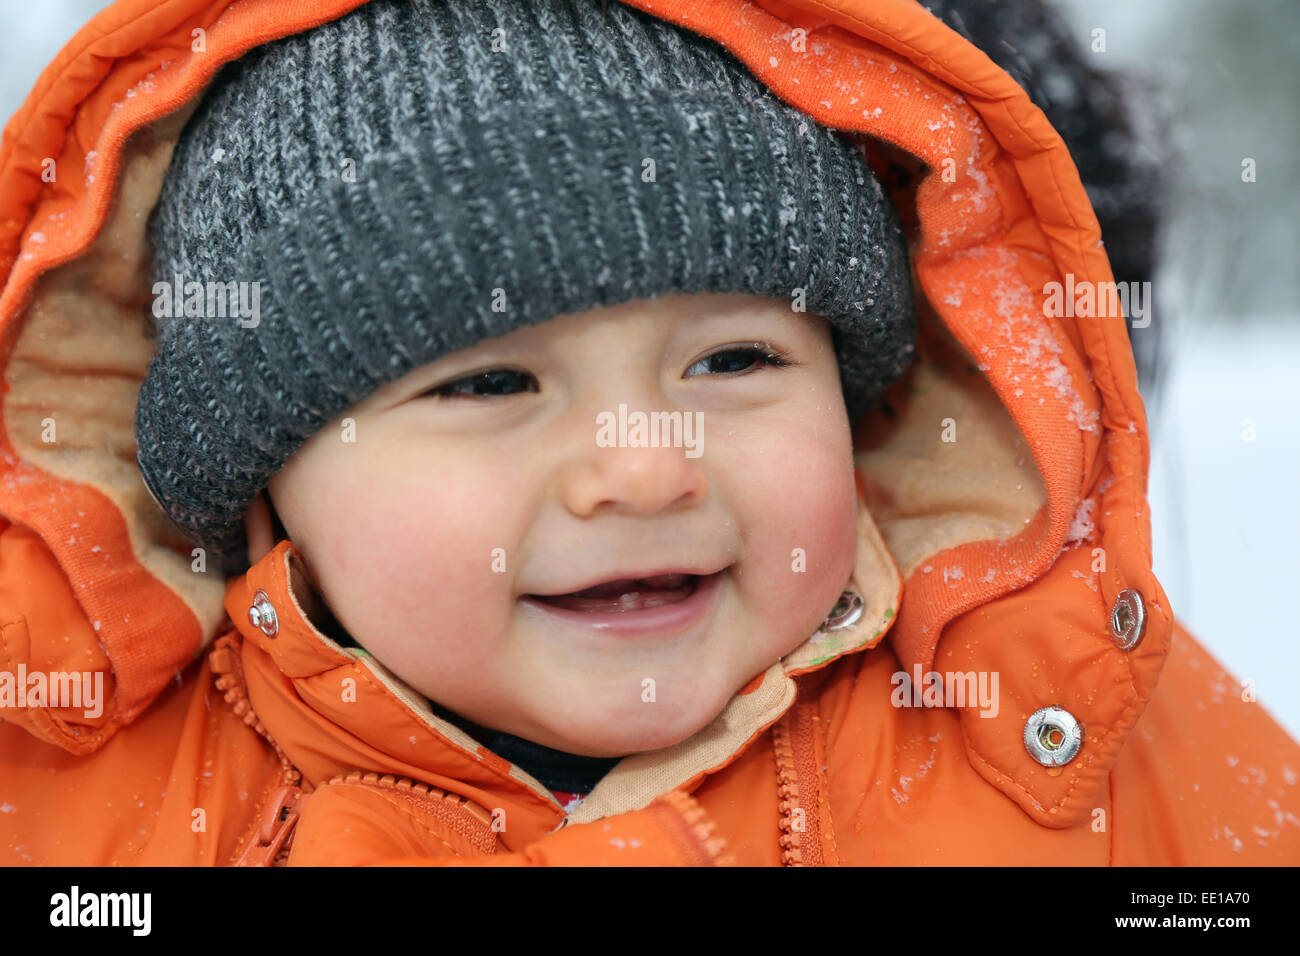 Portrait of a smiling baby with snow in winter with cap and winter clothes Stock Photo